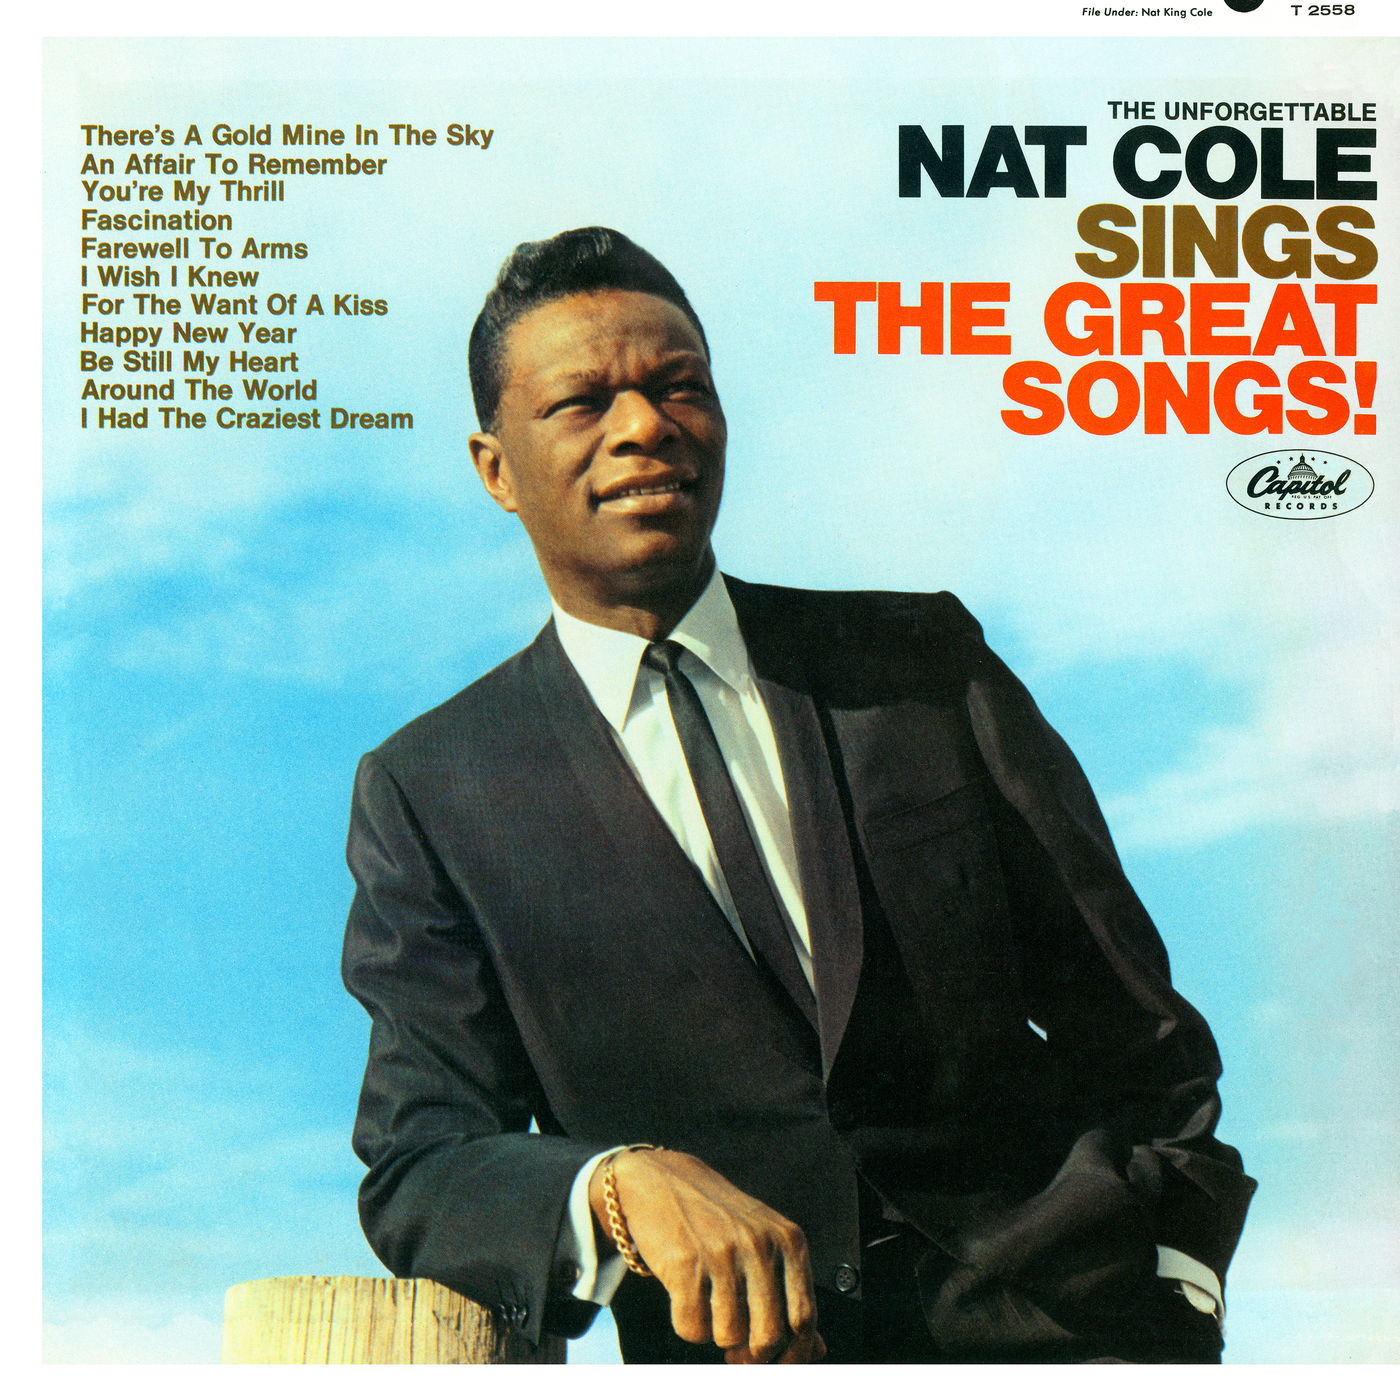 Nat King Cole – The Unforgettable Nat King Cole Sings The Great Songs (1966/2021) [FLAC 24bit/96kHz]